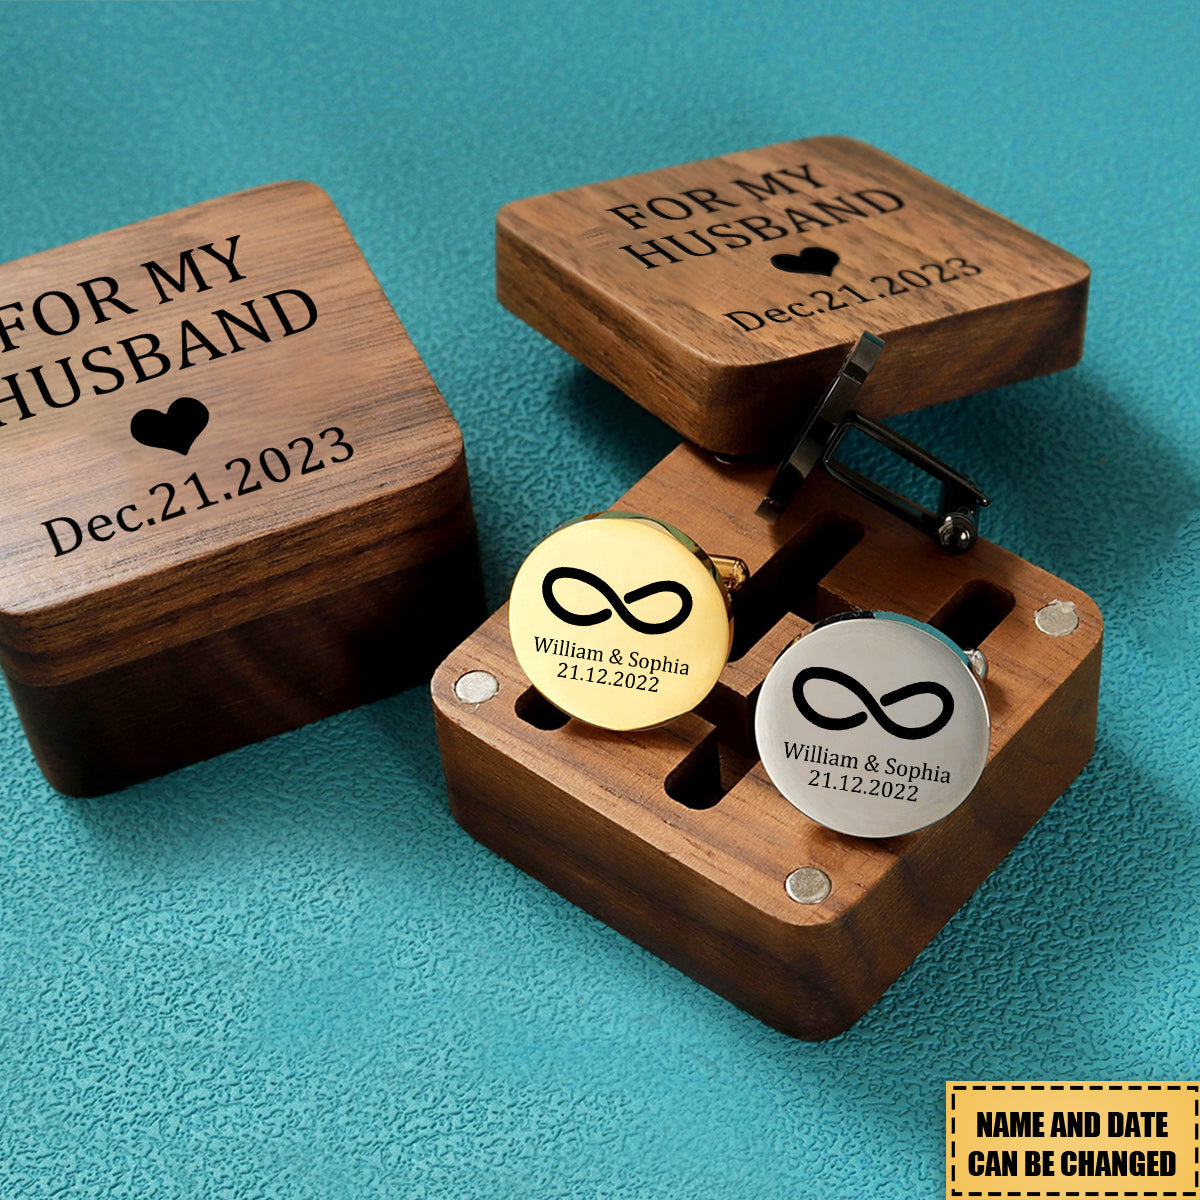 For My Husband - Personalized Cufflinks - Gift for Him